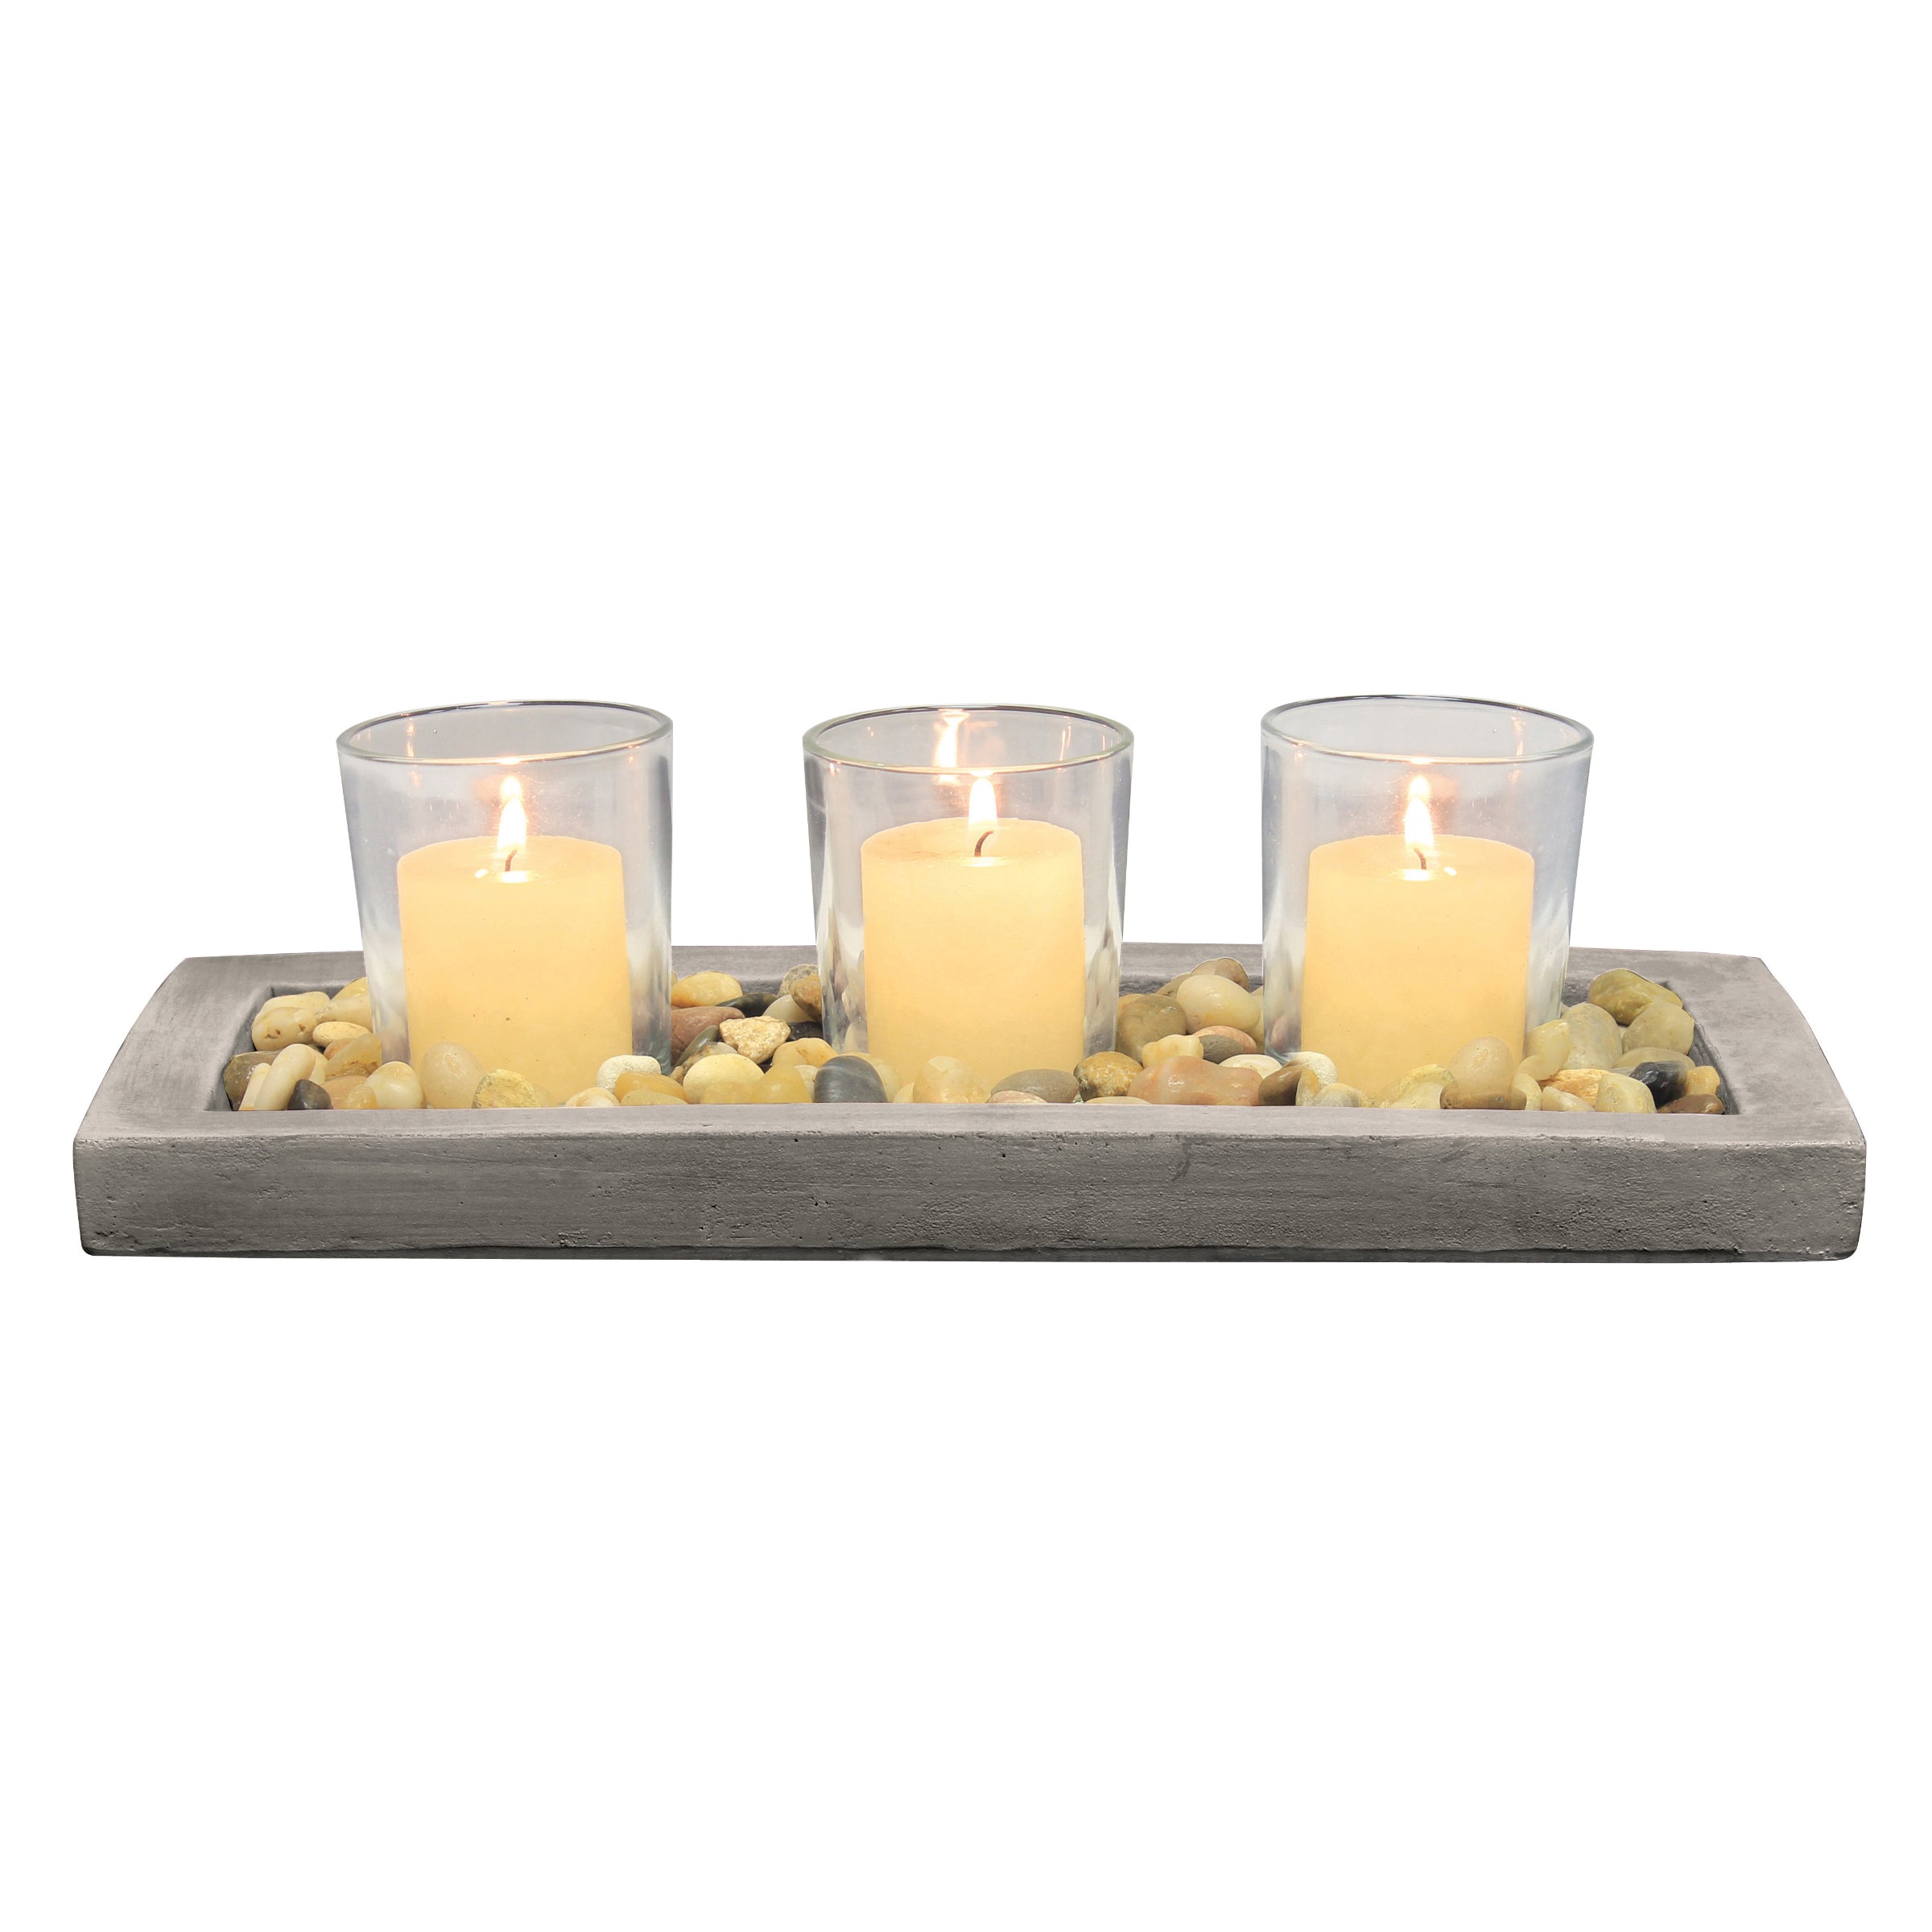 Unscented Long Burning Clear Cup Tea Light Candles, 8 Hour